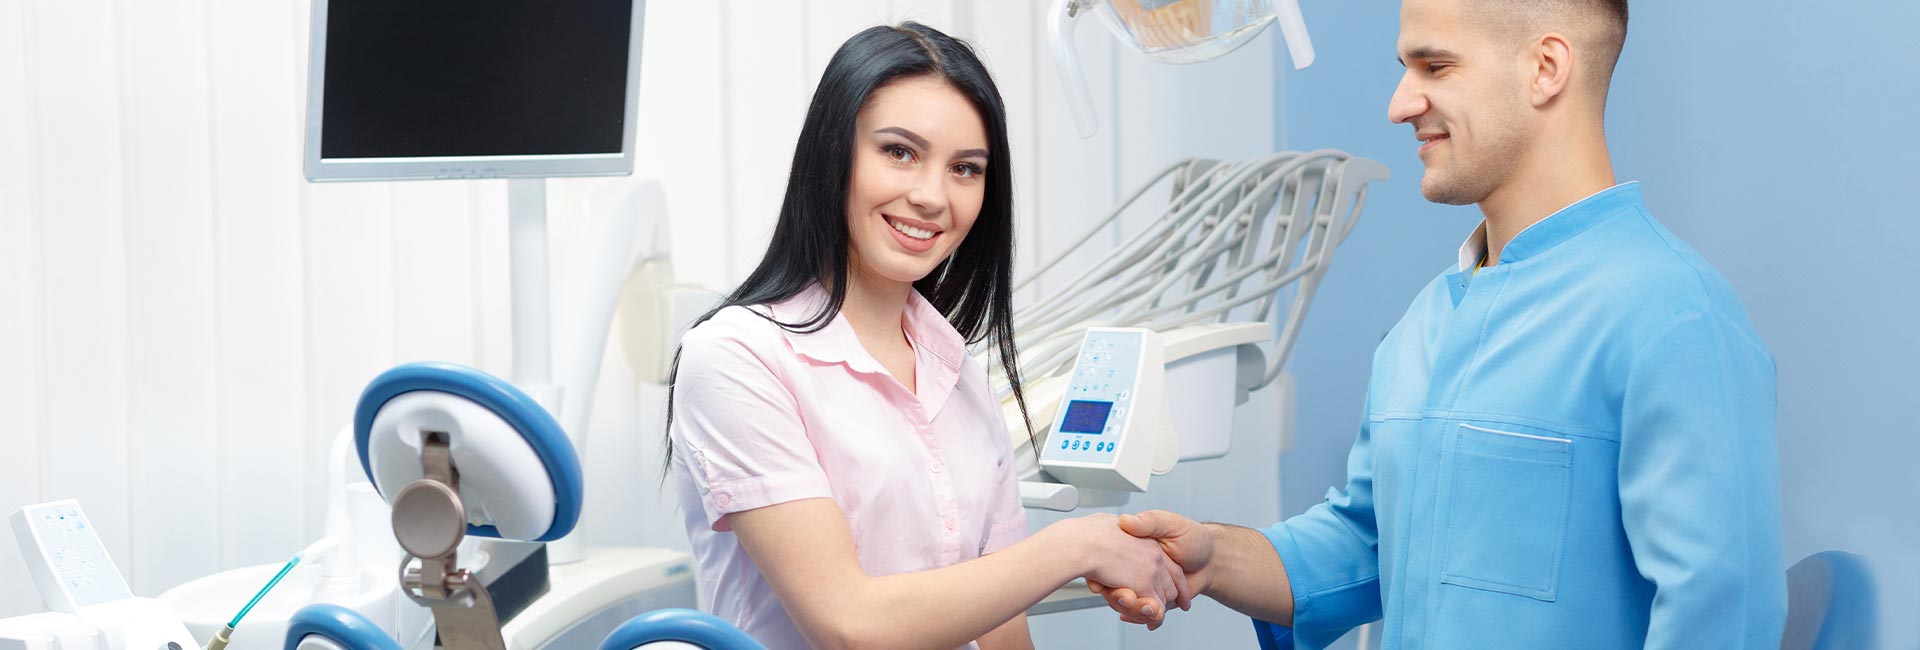 Doctor shaking hands with a female patient